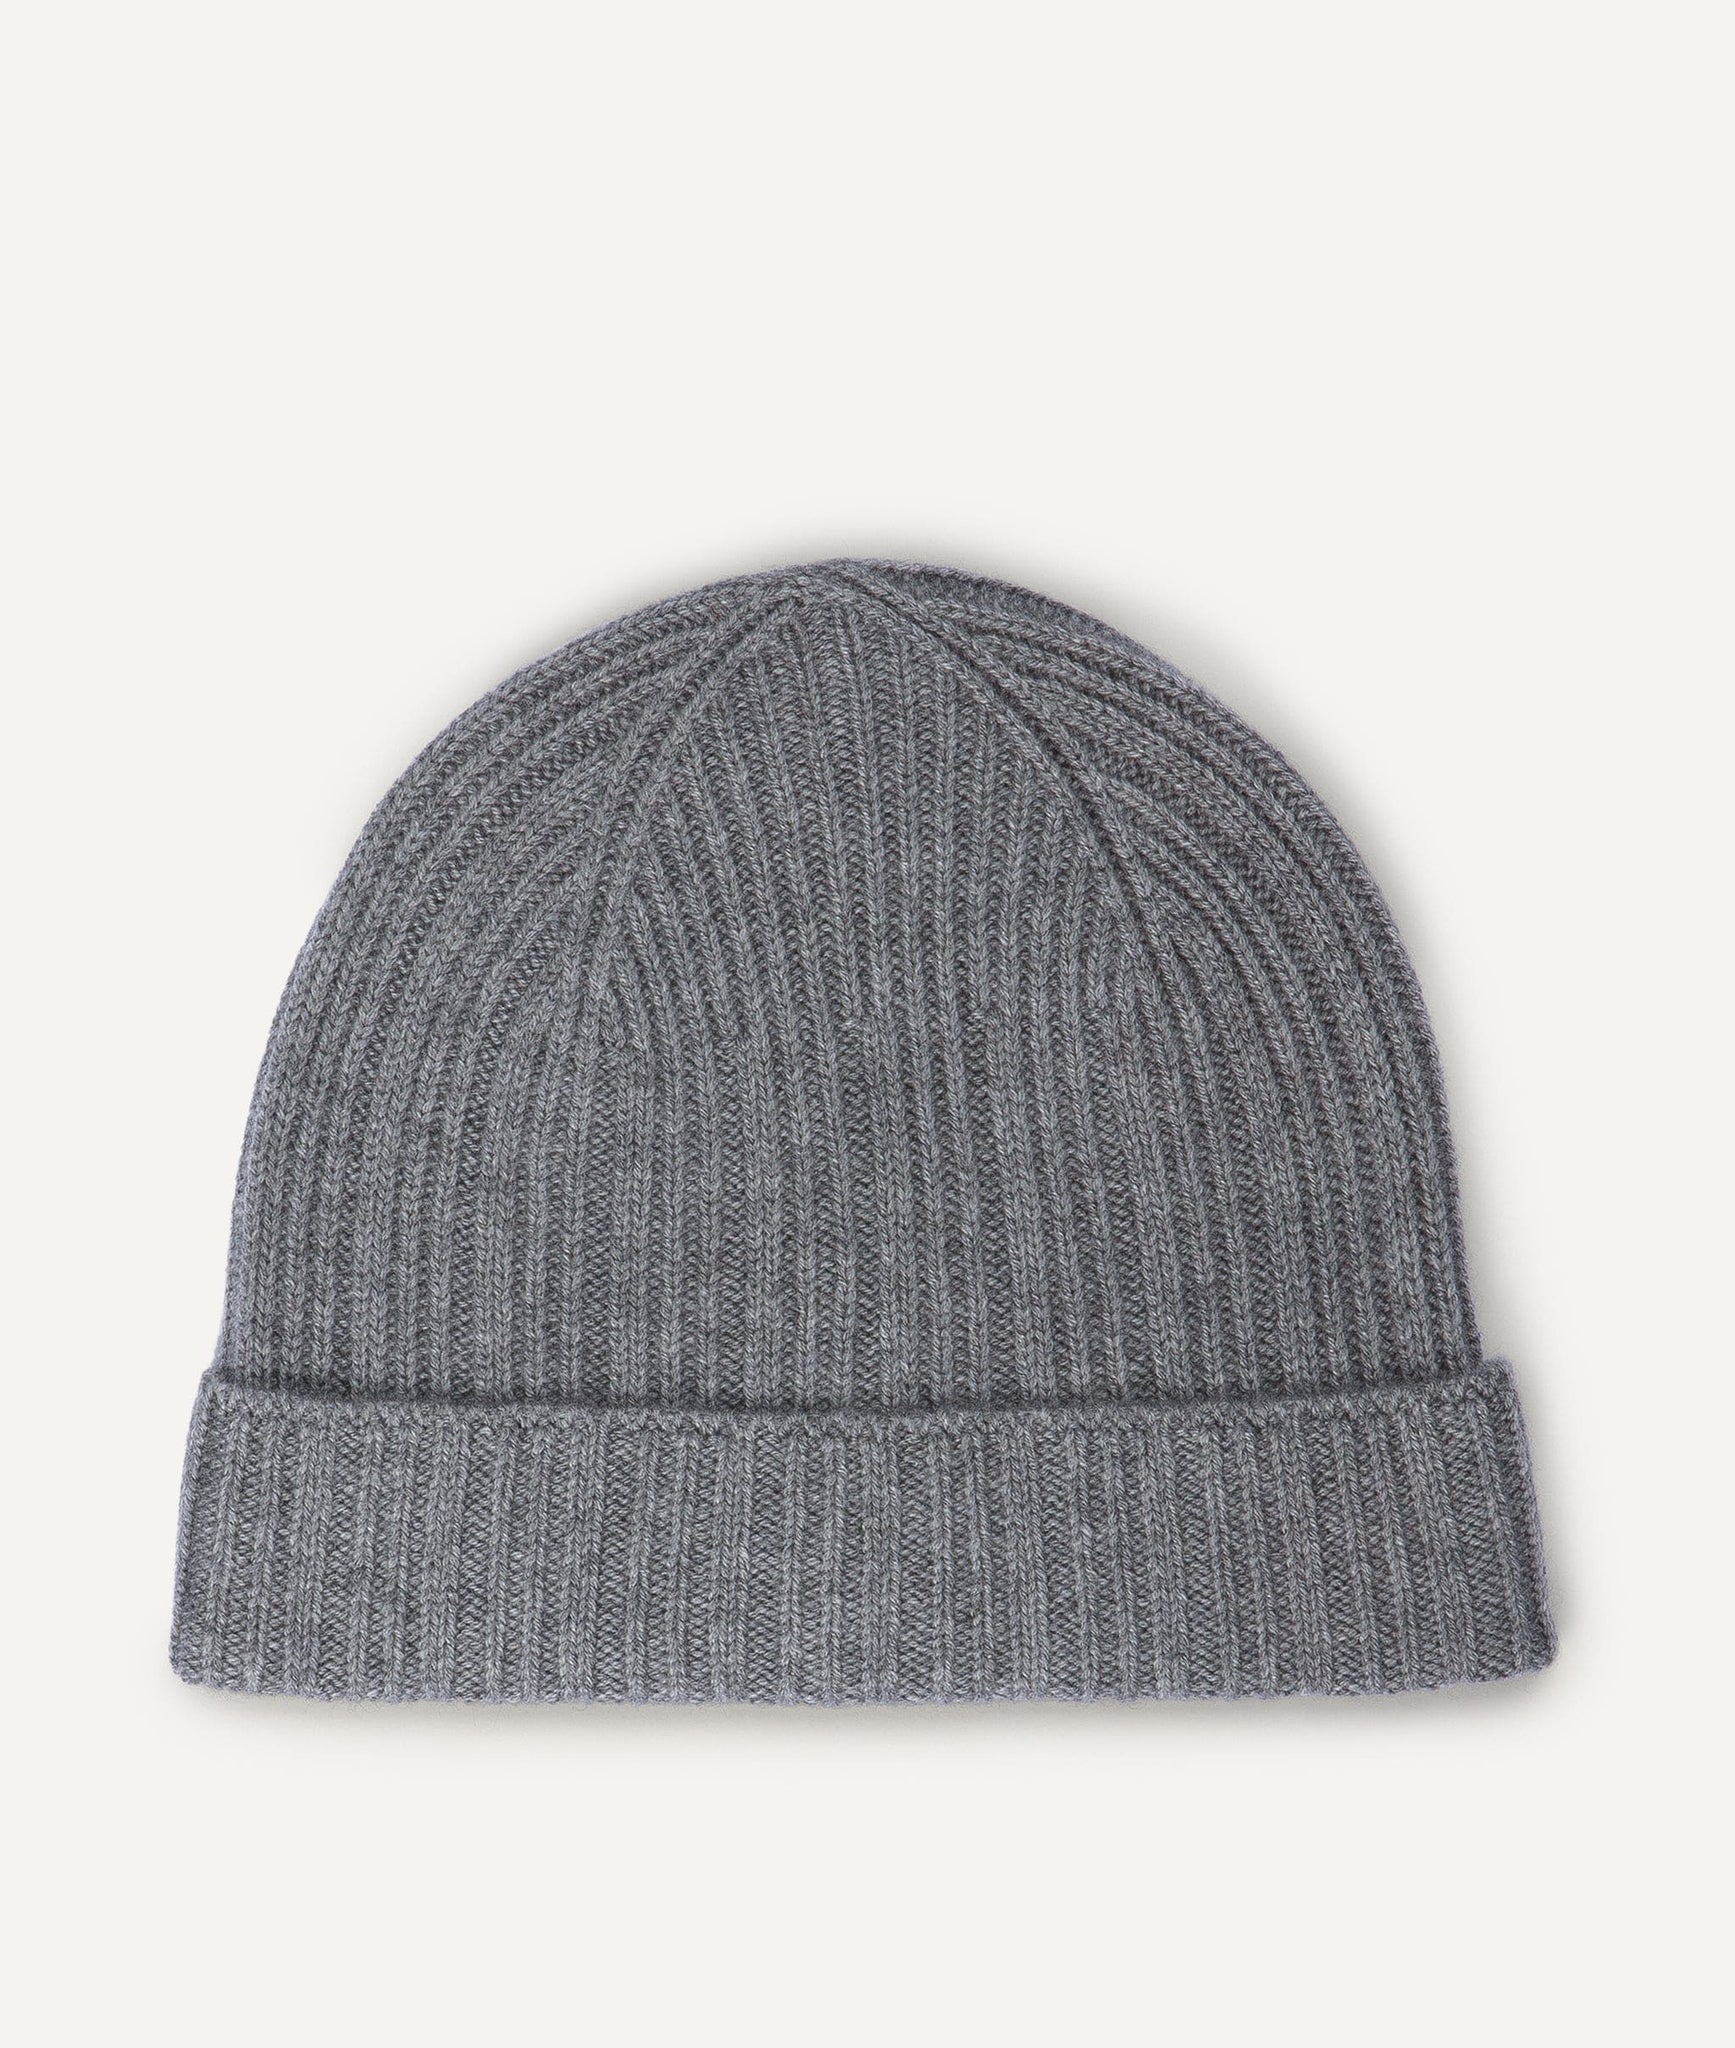 Rib-knit Beanie in Chashmere